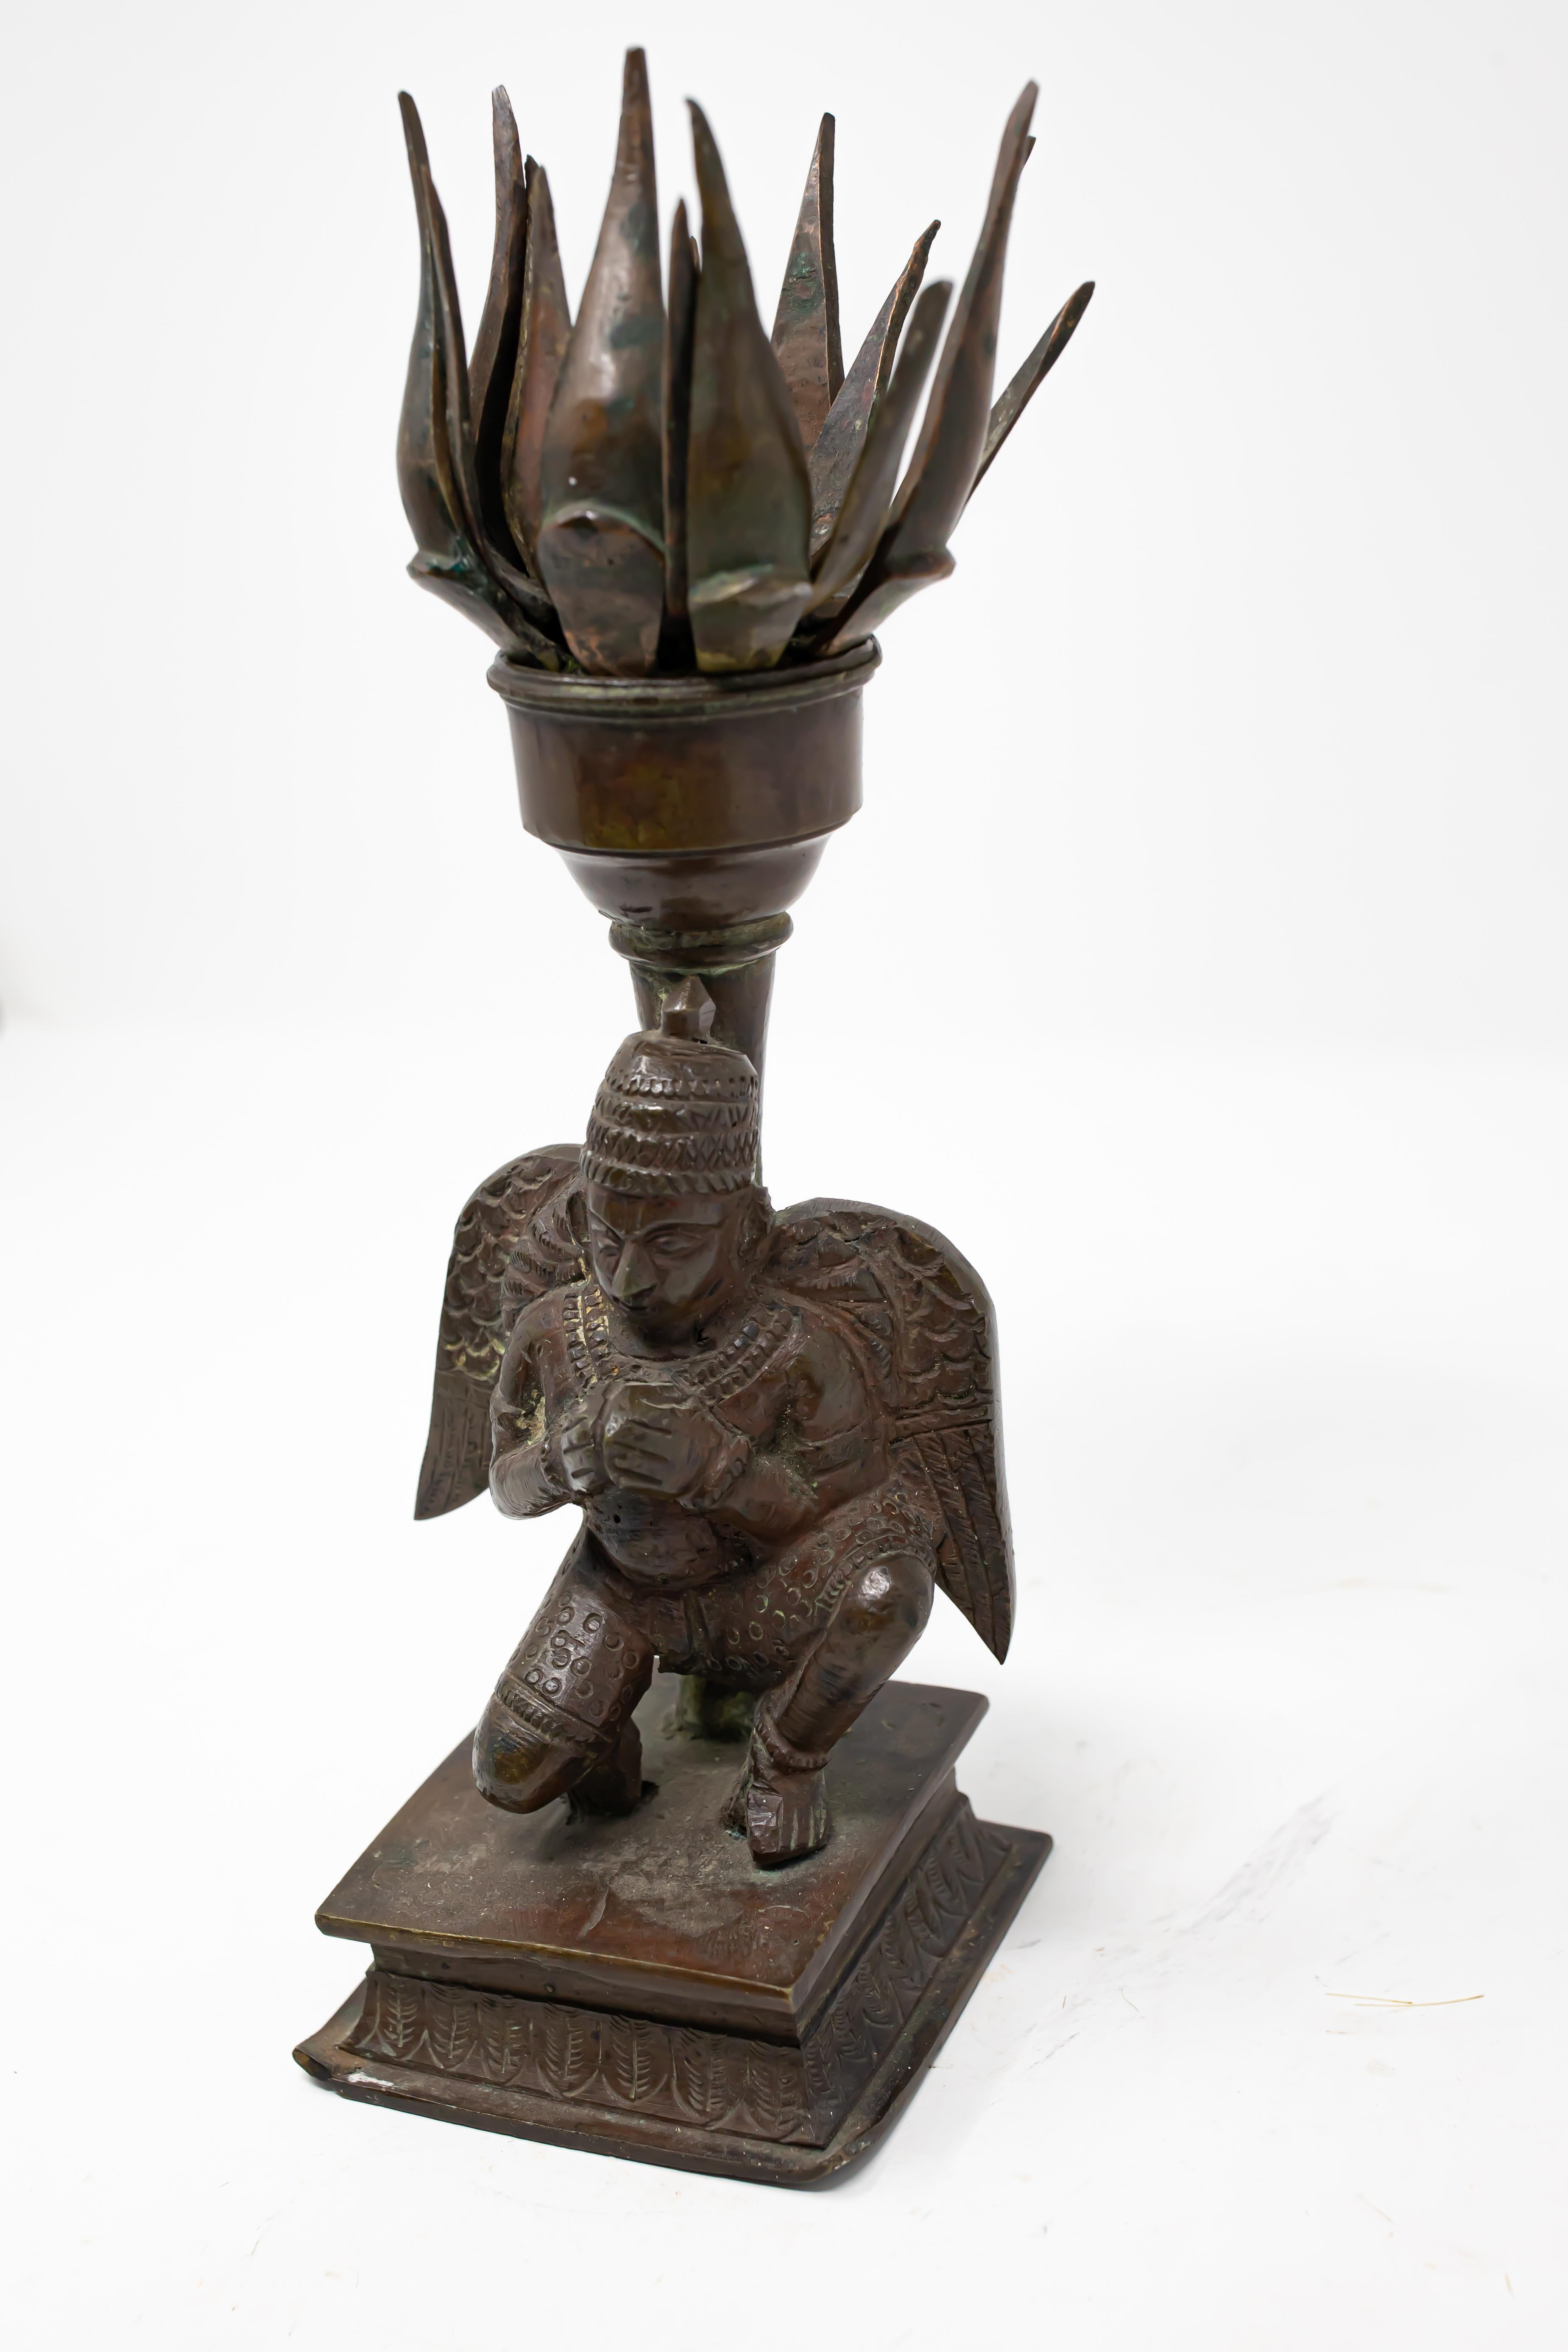 Offering this unique bronze Tibetan censer from the 19th century. Starting on a square base with foliate designs that go around in a center band. It rises to a figure that is kneeling and has wings. Behind him is a stem that rises to a Lotus flower